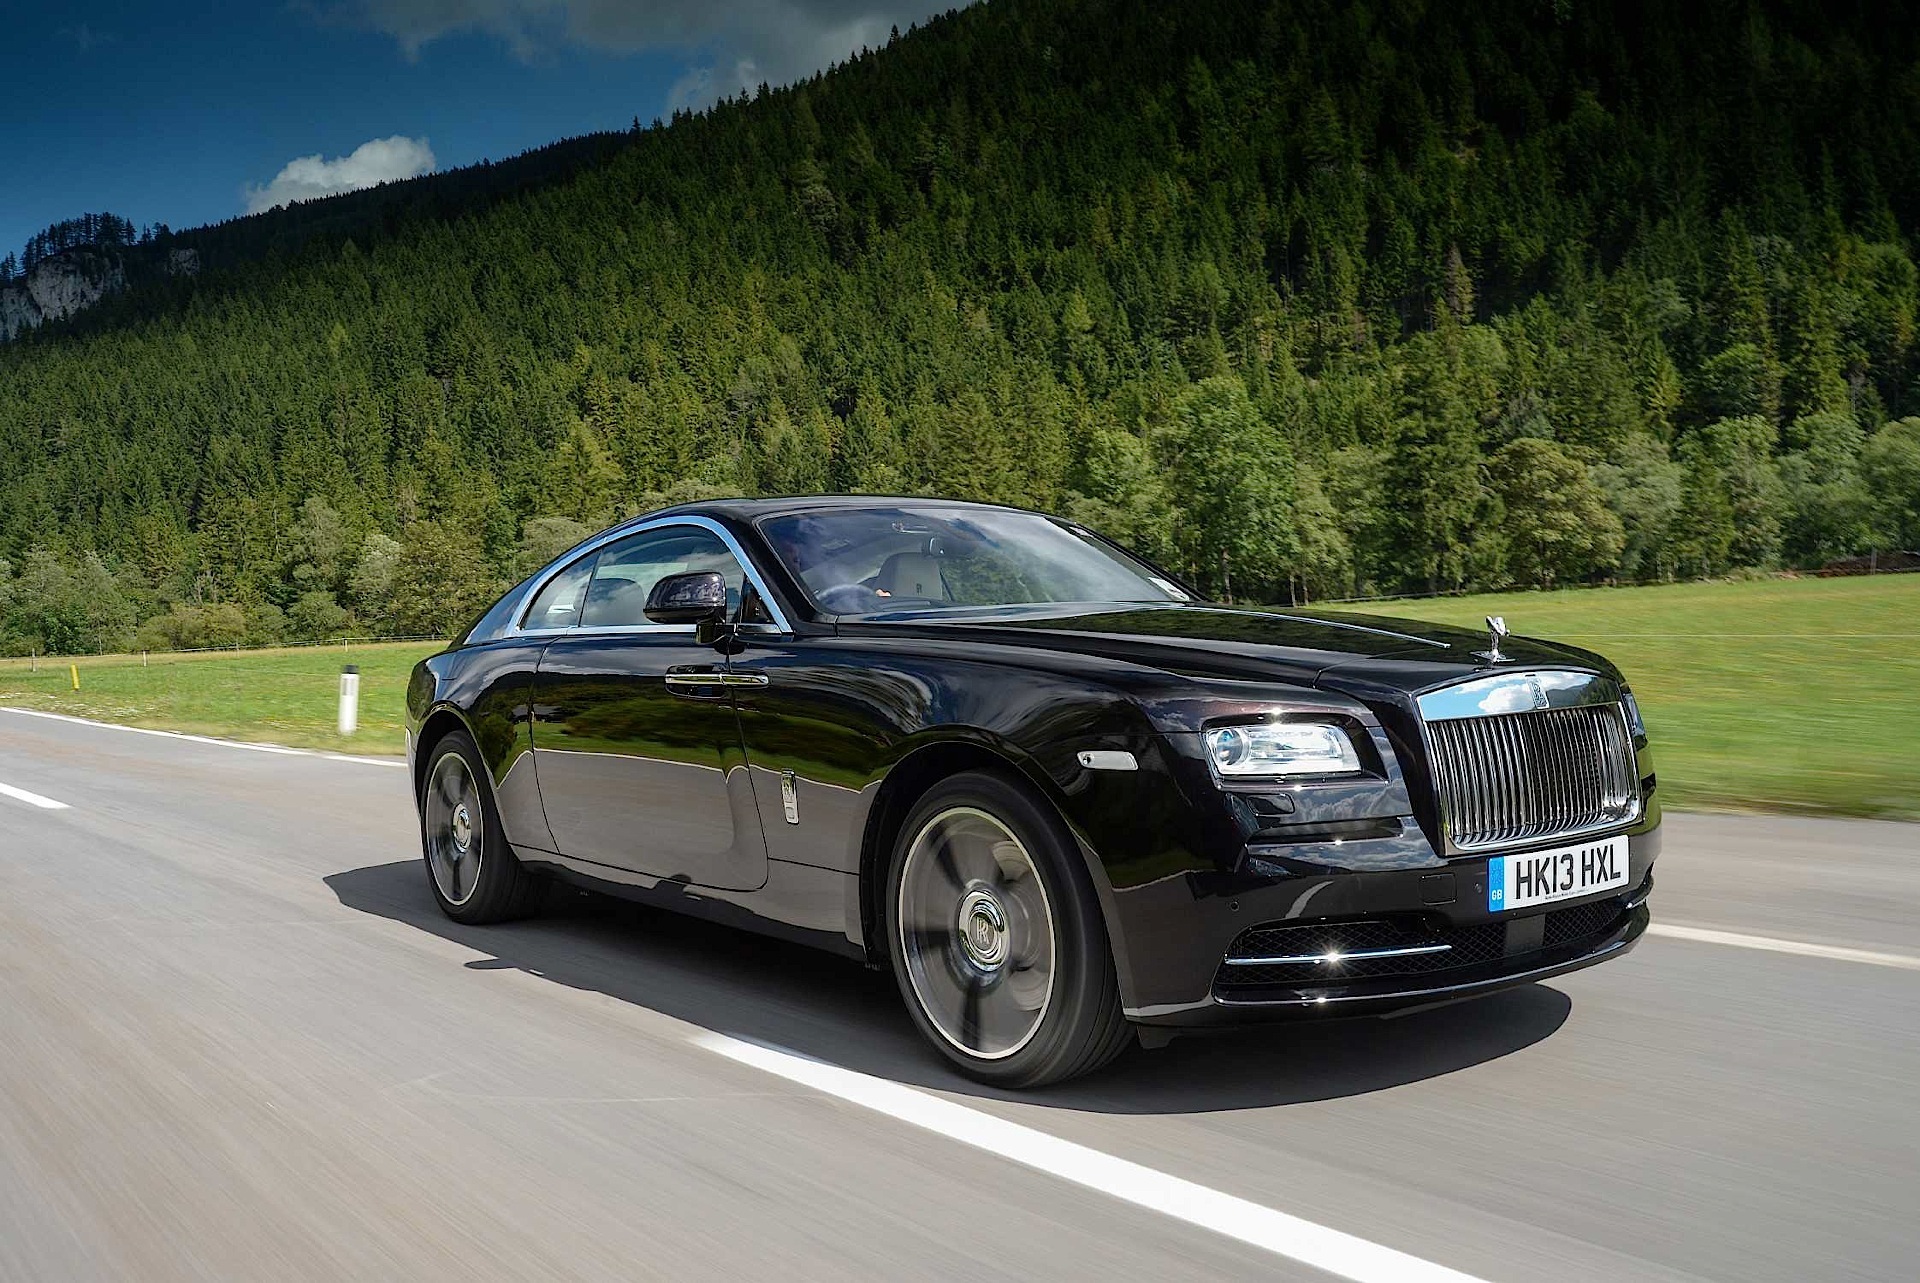 Car Rolls Royce Luxury Cars British Cars Frontal View Licence Plates Trees Clouds Road Driving Vehic 1920x1283